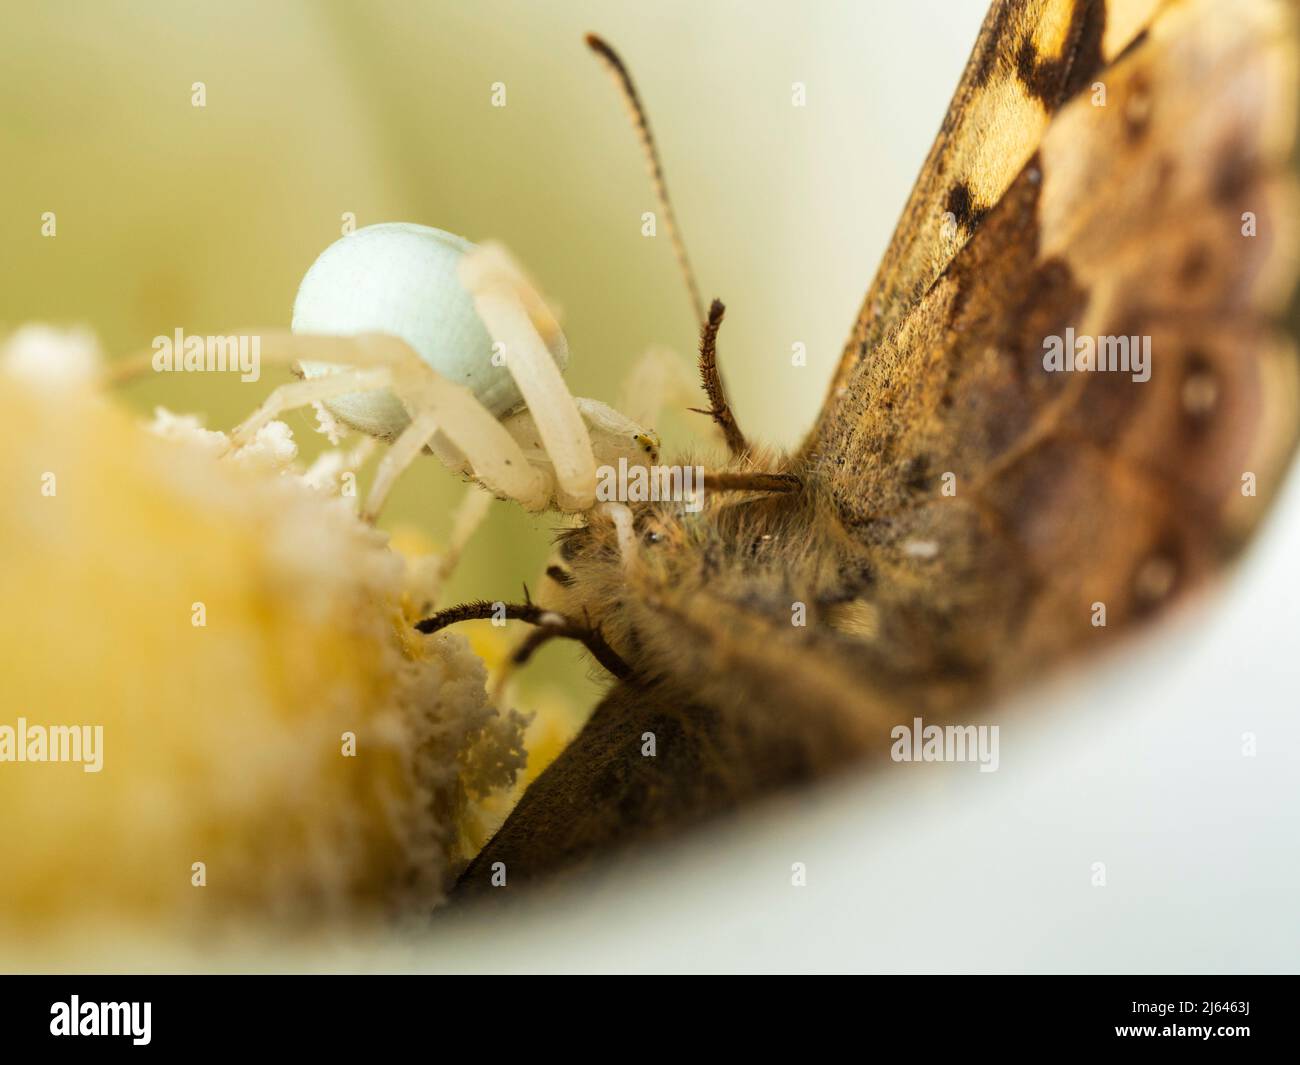 UK crab spider, Misumena vatia, with captured speckeld wood  butterfly, Pararge aegeria, in the flower spathe of a calla lily, Zantedeschia aethiopica Stock Photo